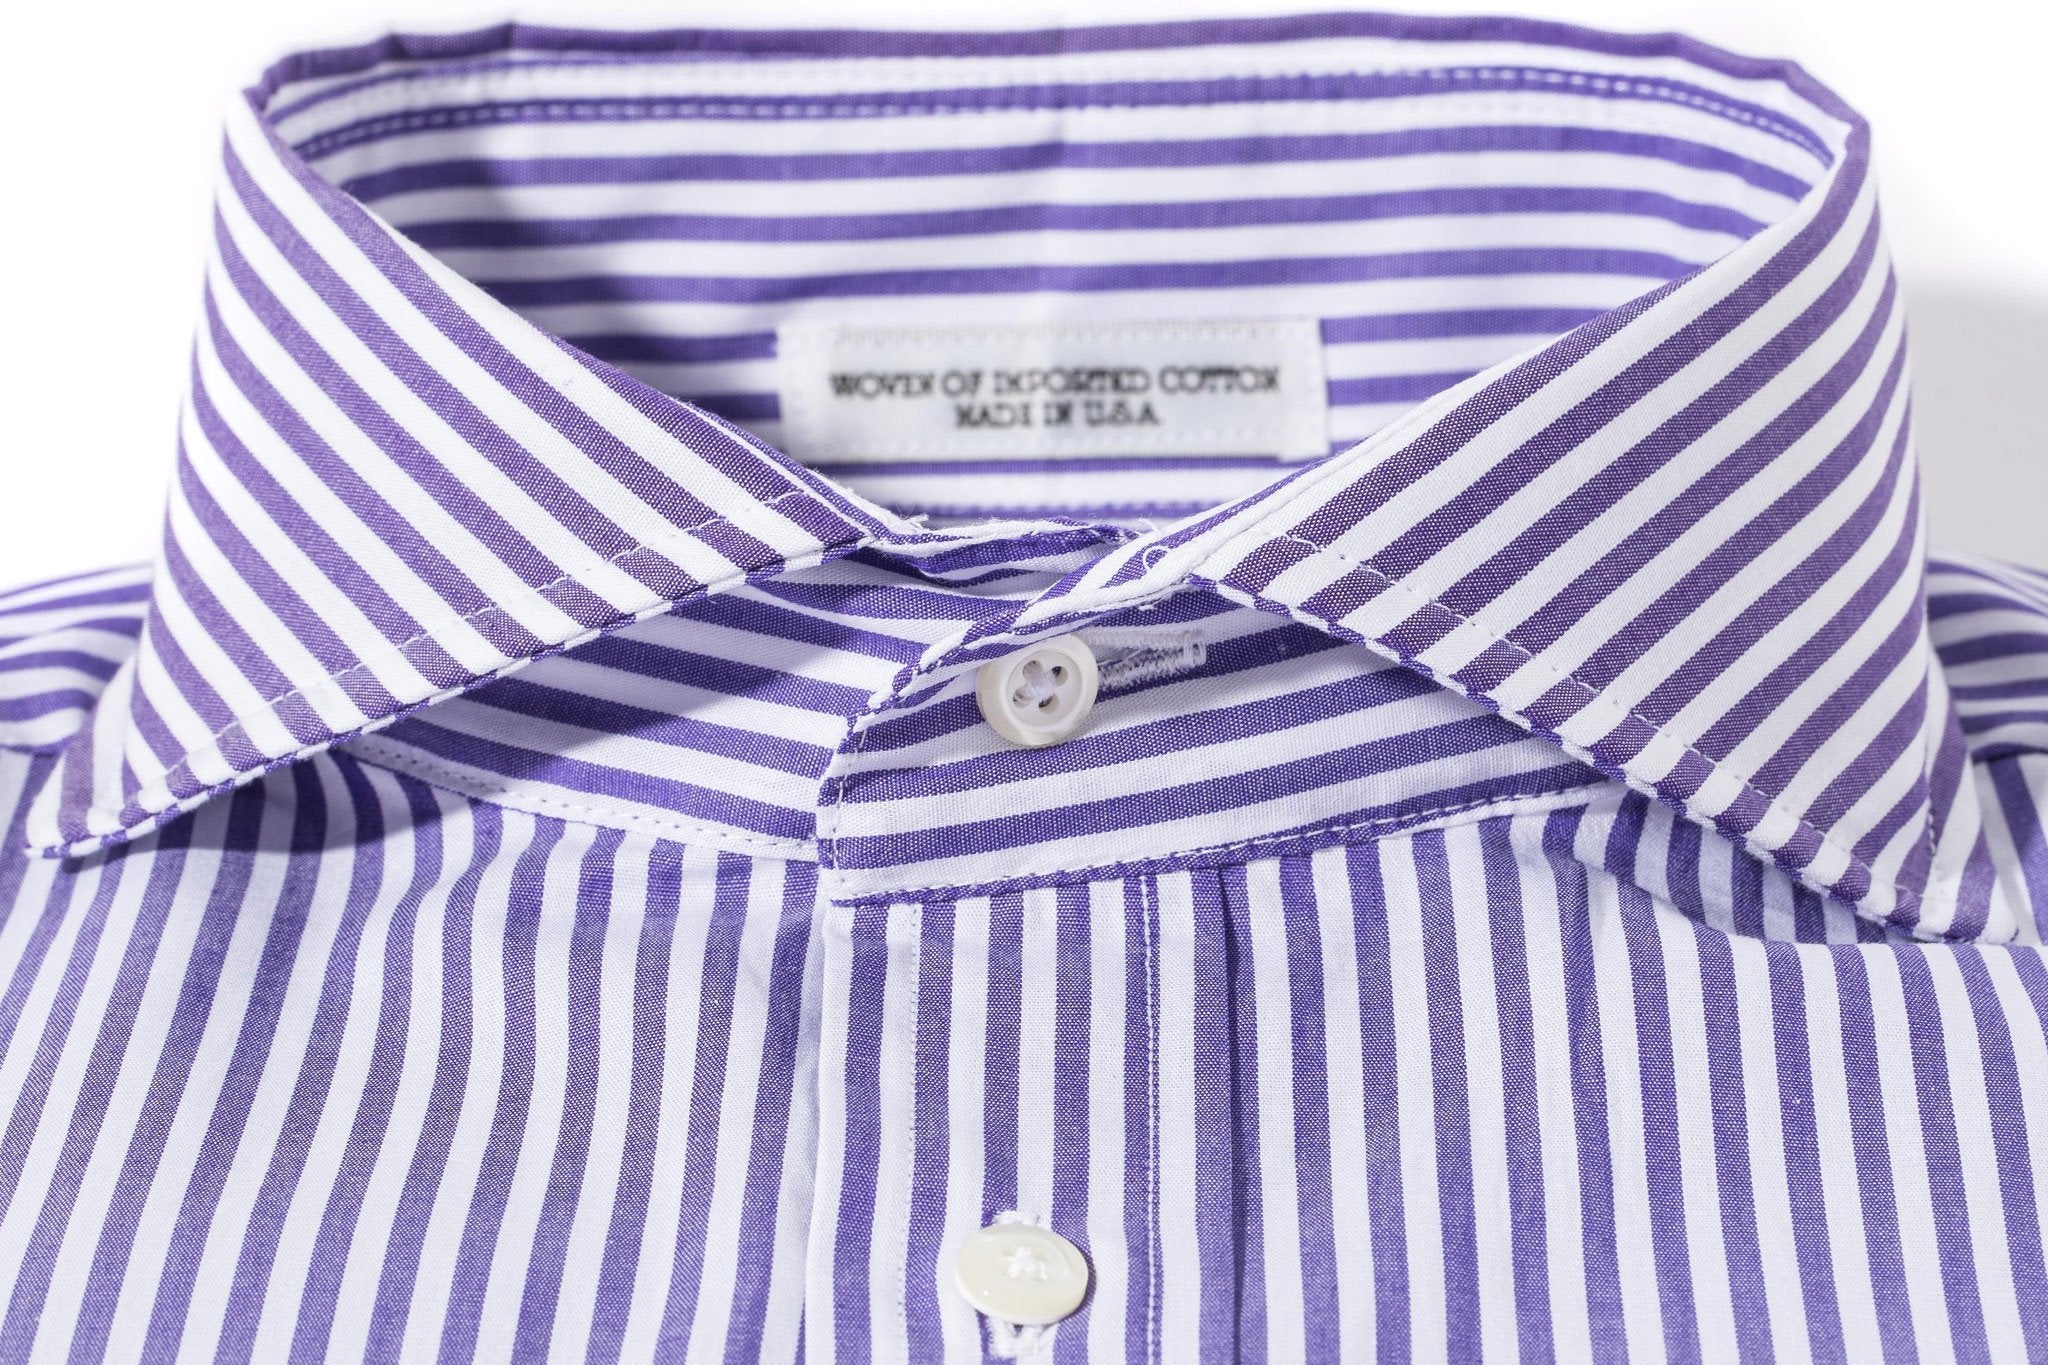 Coras Bengal Dress Shirt In Purple | Mens - Shirts - Outpost | Axels-Is